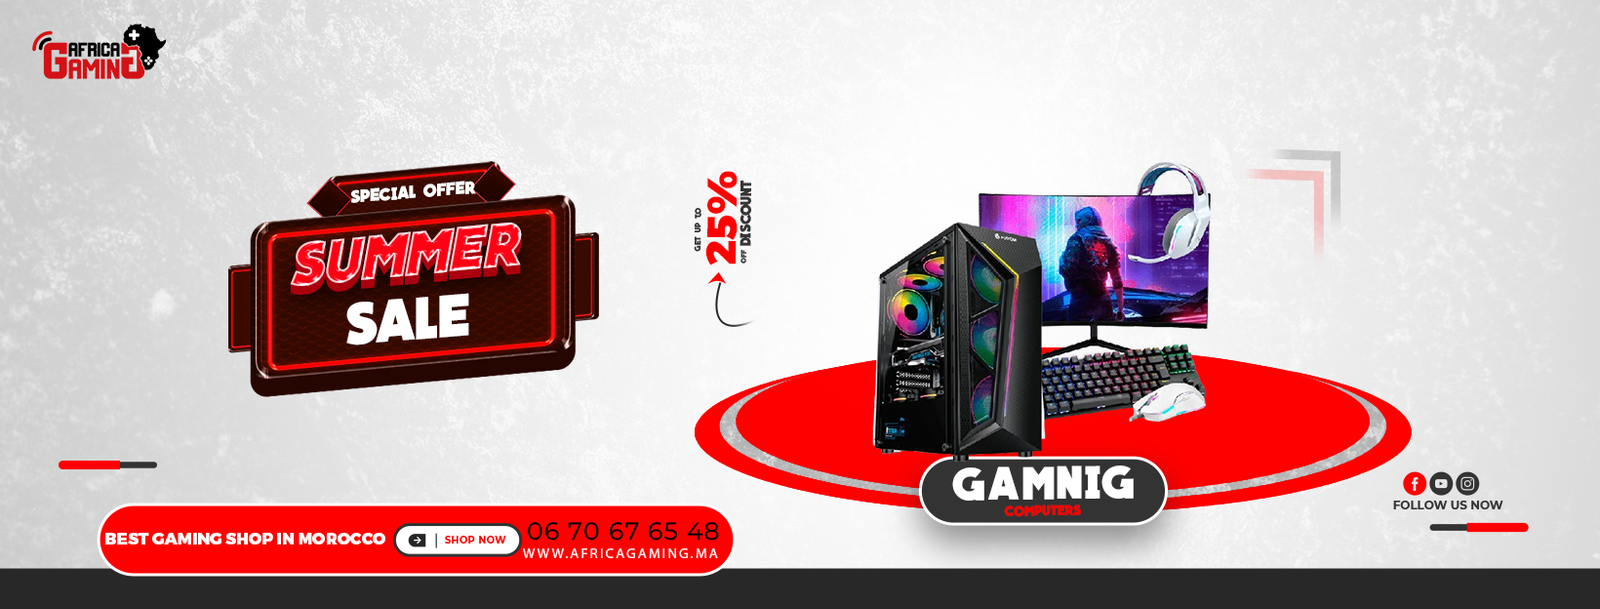 89156935 Cybermonday Facebook Cover 16 Africa Gaming Maroc